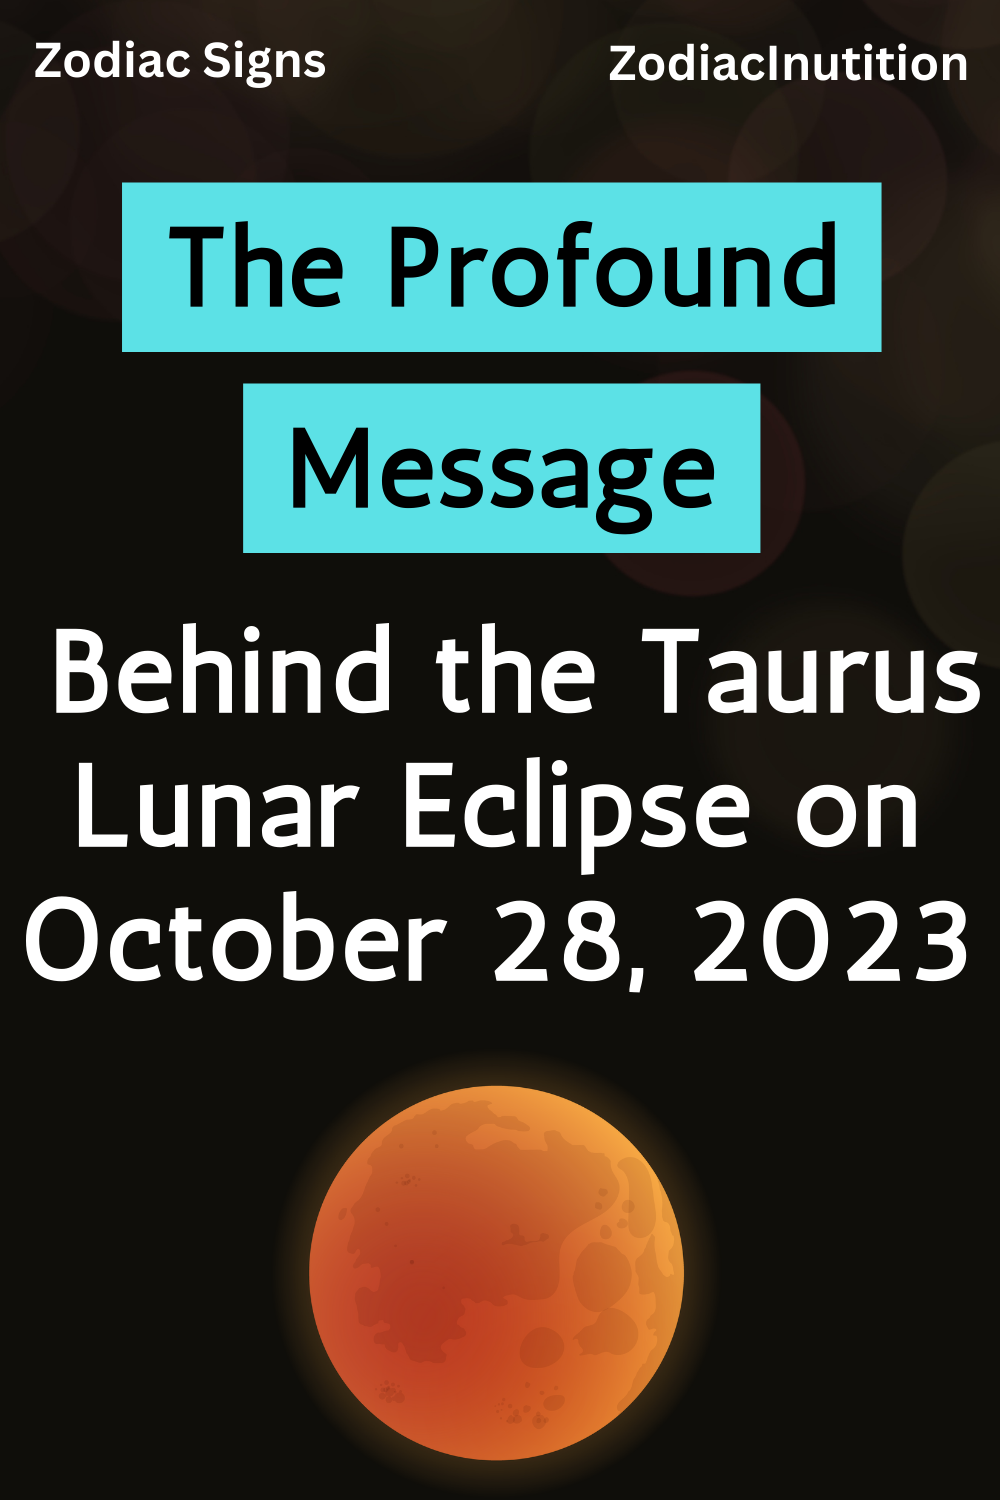 The Profound Message Behind the Taurus Lunar Eclipse on October 28, 2023